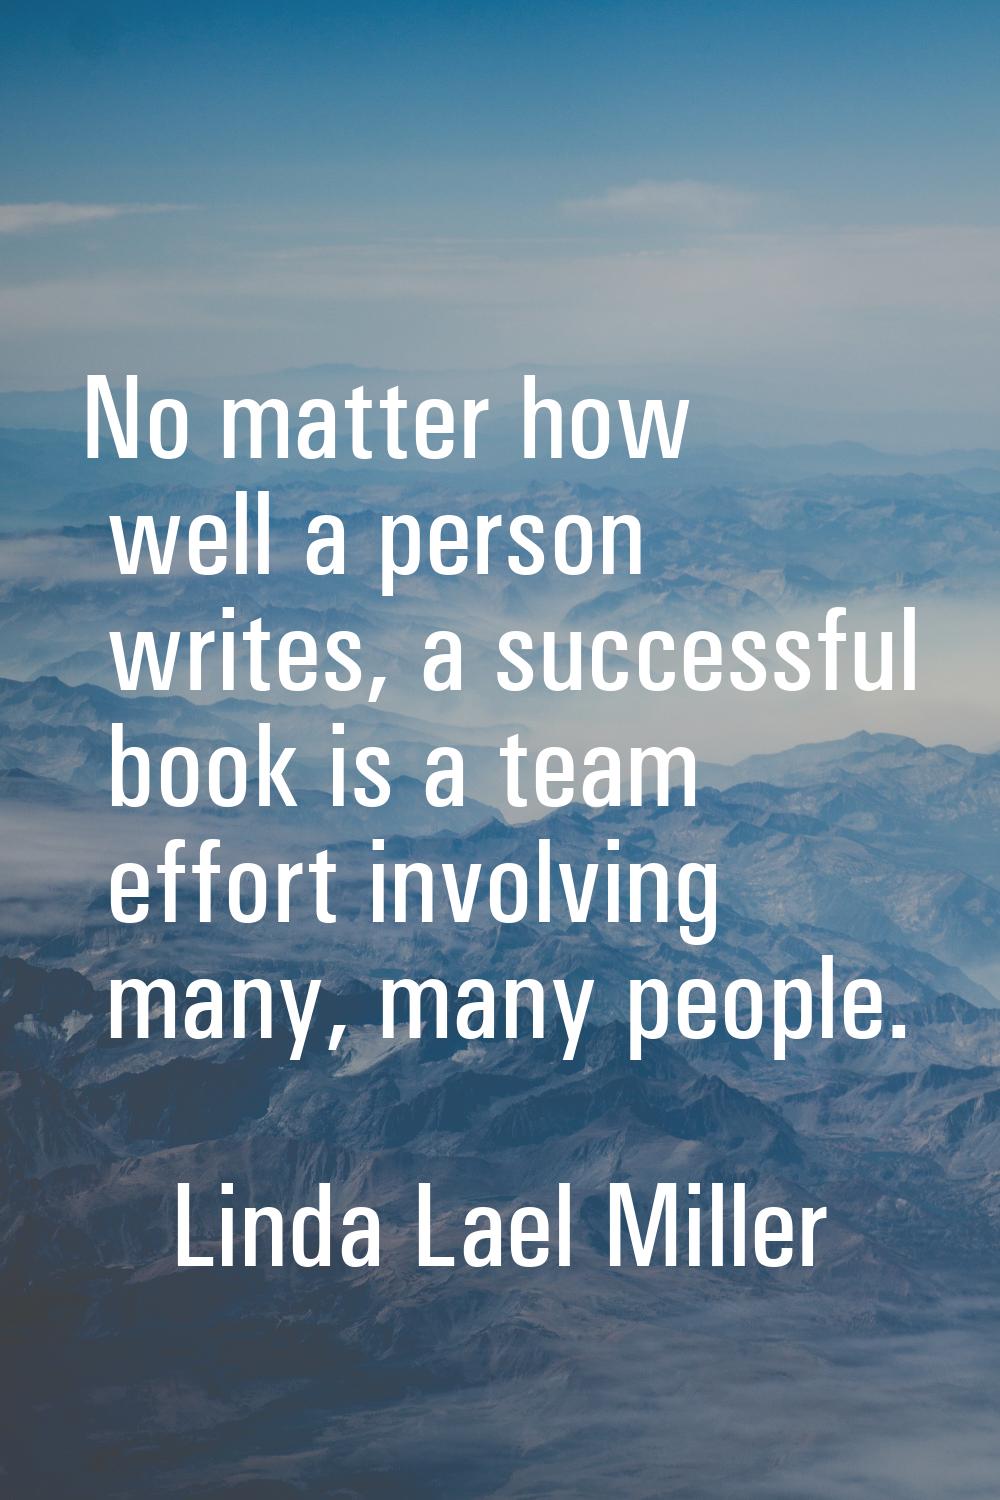 No matter how well a person writes, a successful book is a team effort involving many, many people.